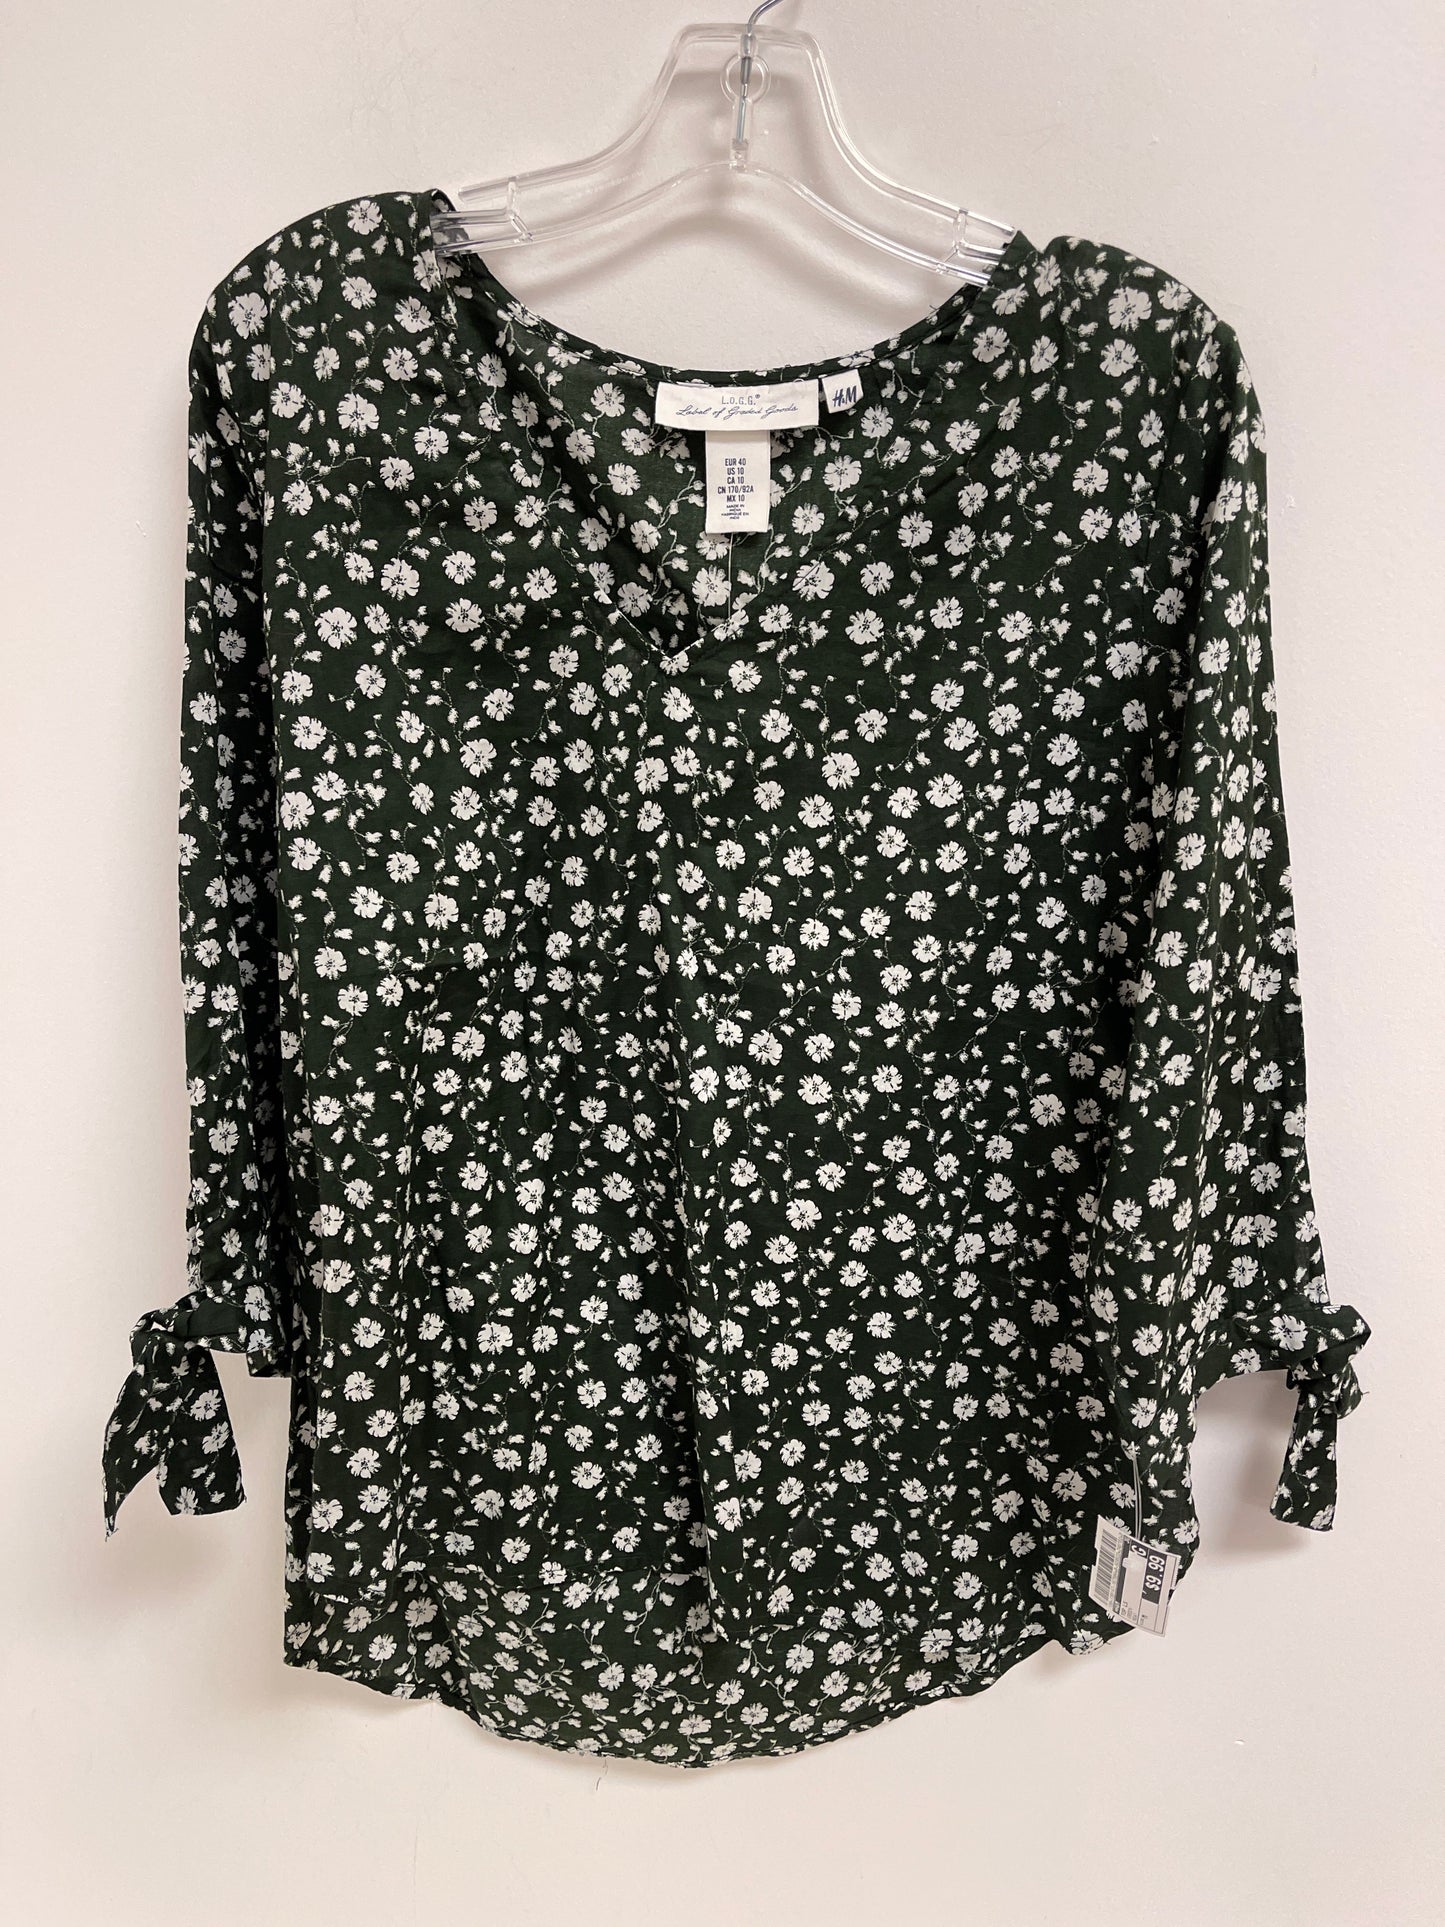 Green Top Long Sleeve H&m, Size M